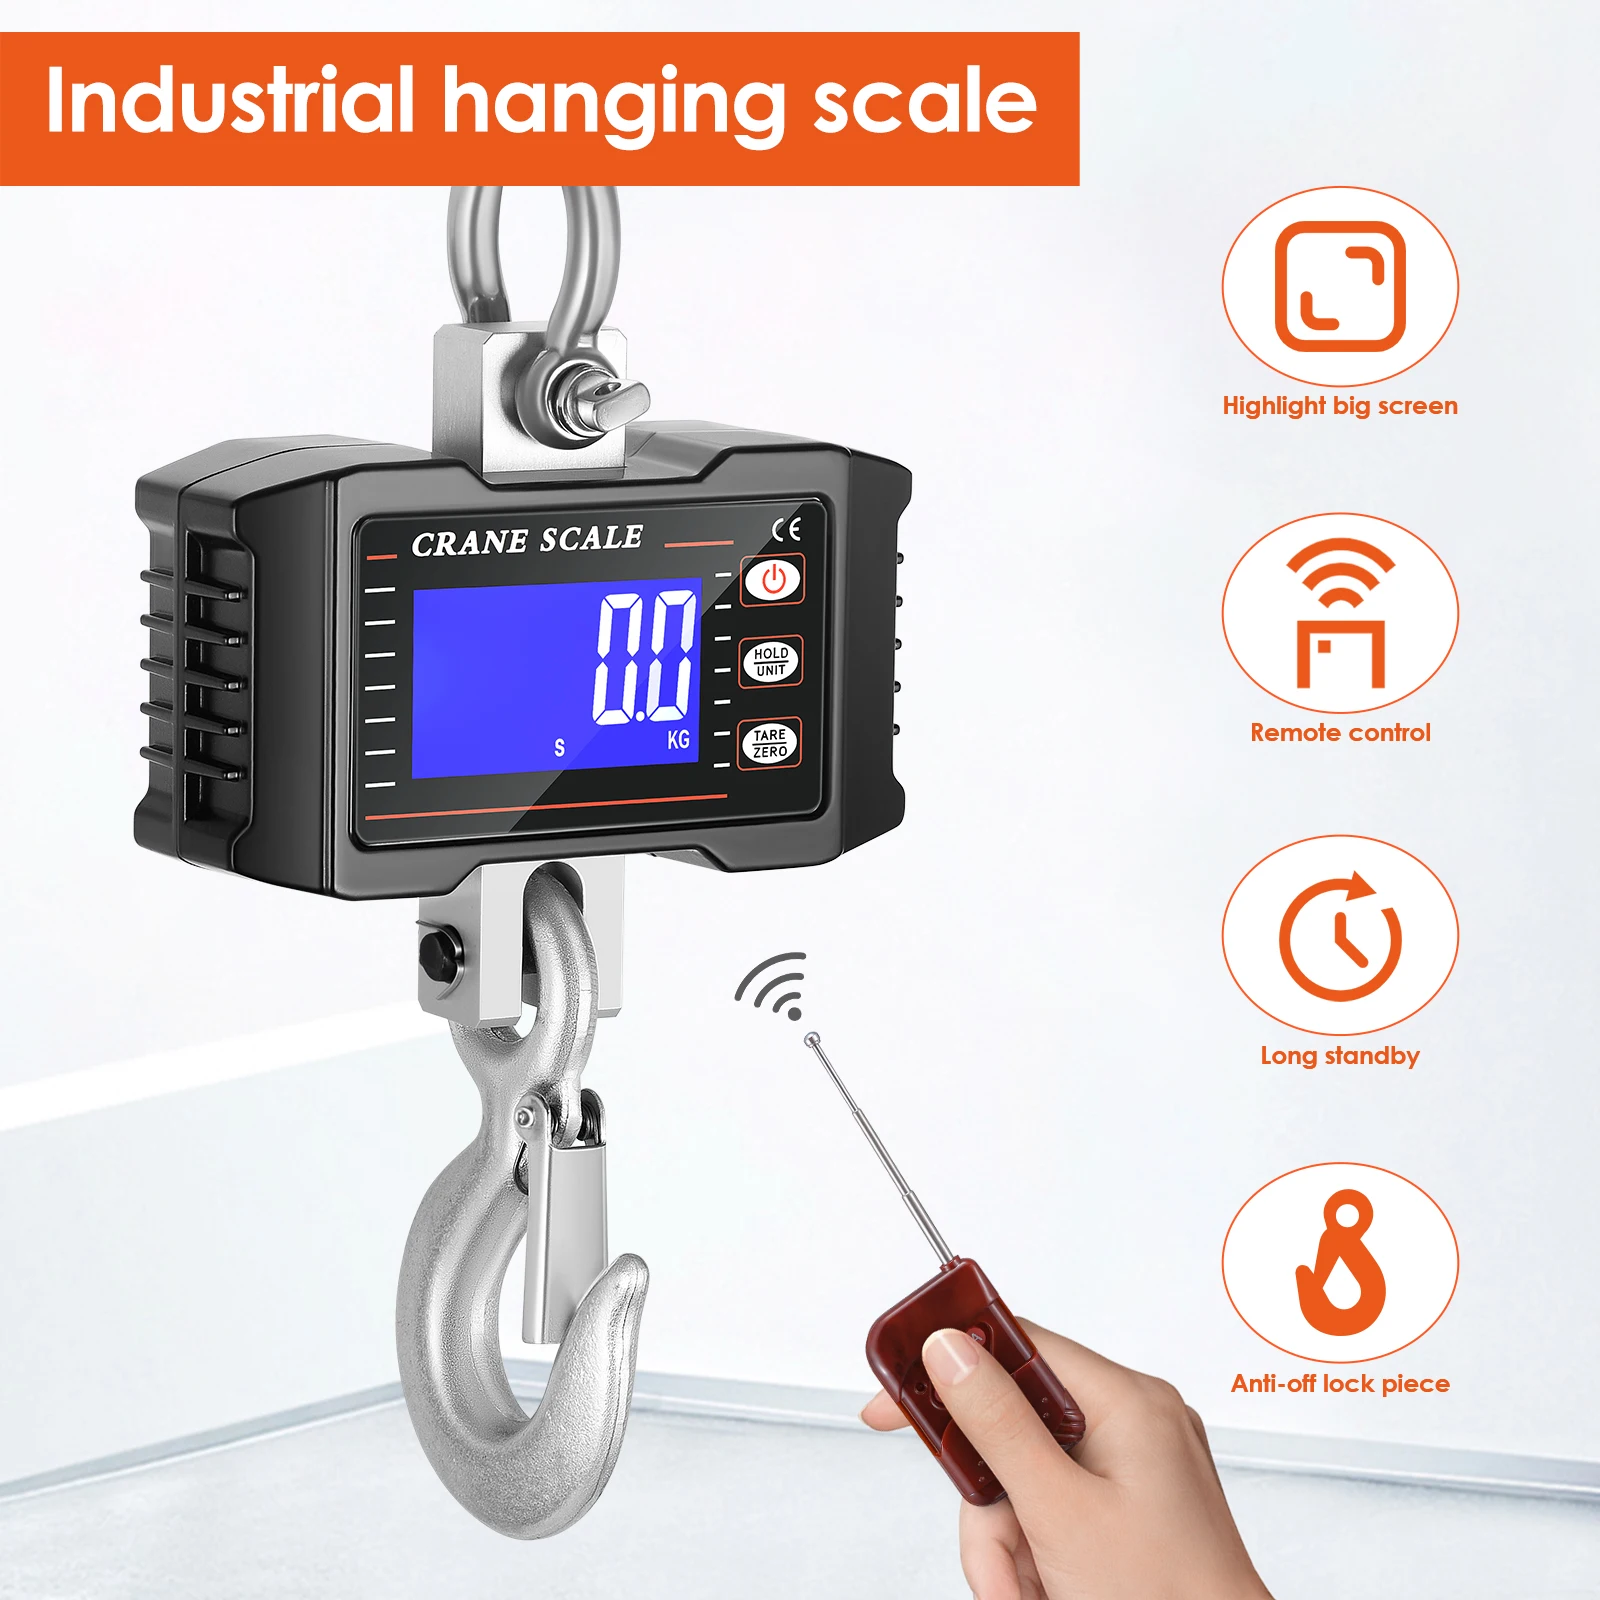 1000KG/2200LBS Digital Hanging Scale, Remote Control Heavy Duty Crane Scale Dimmable LED Industrial Hook Scales